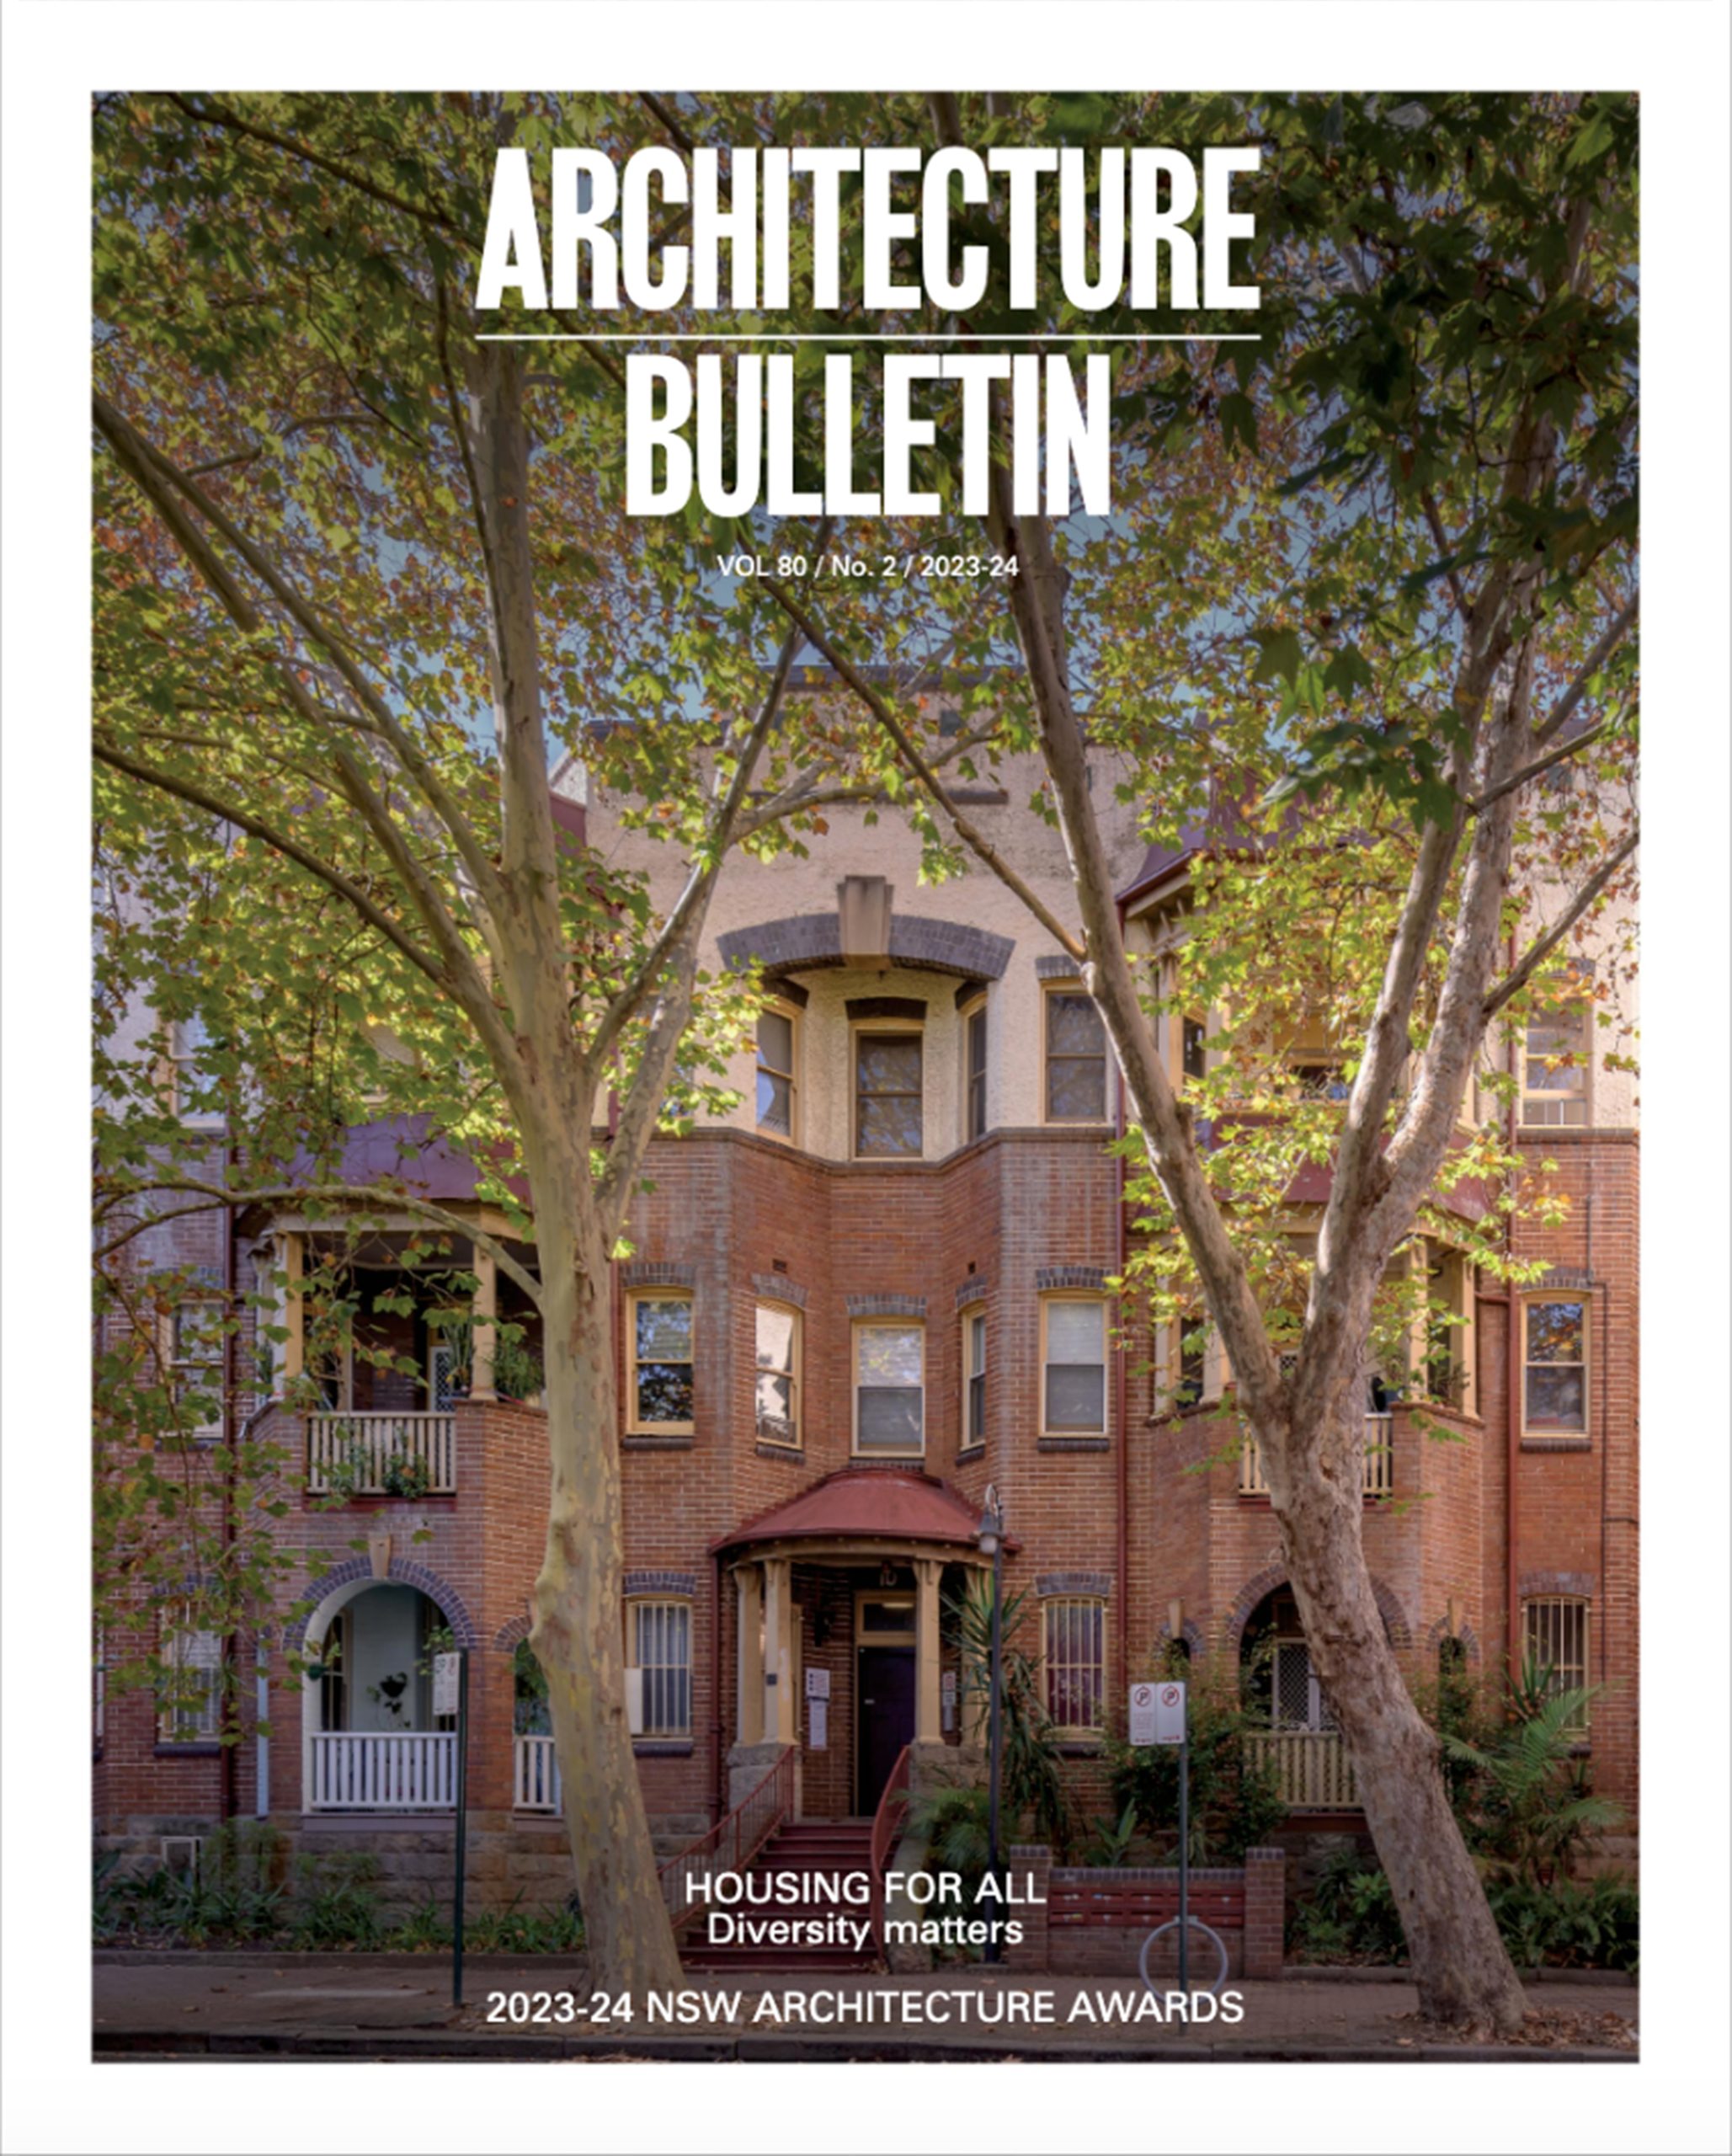 ARCHITECTURE BULLETIN – HOUSING FOR ALL